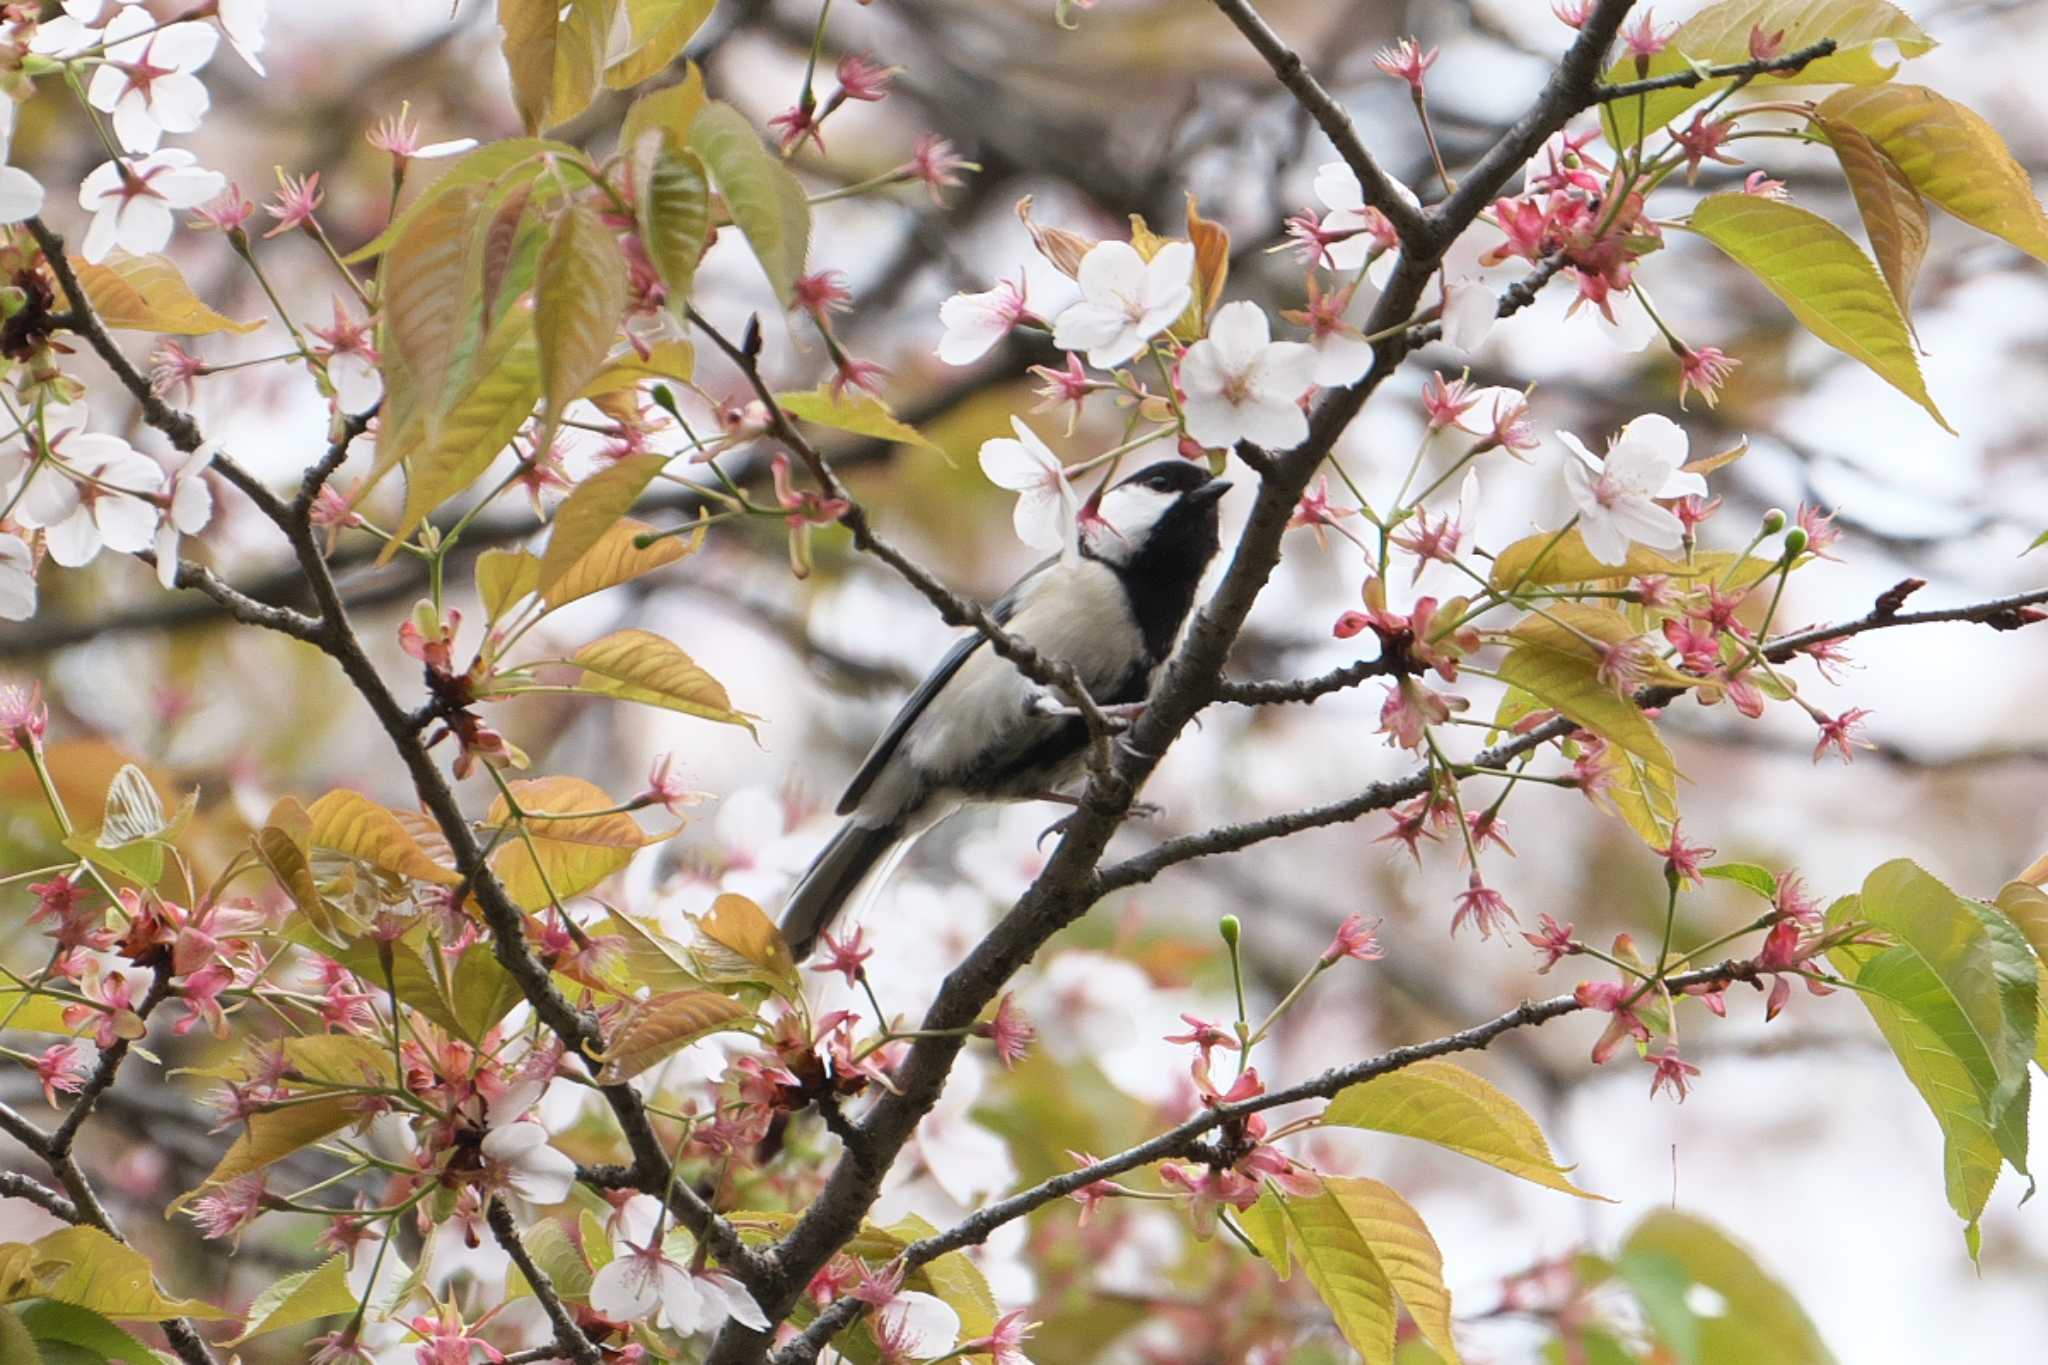 Photo of Japanese Tit at 瀬上市民の森 by Y. Watanabe